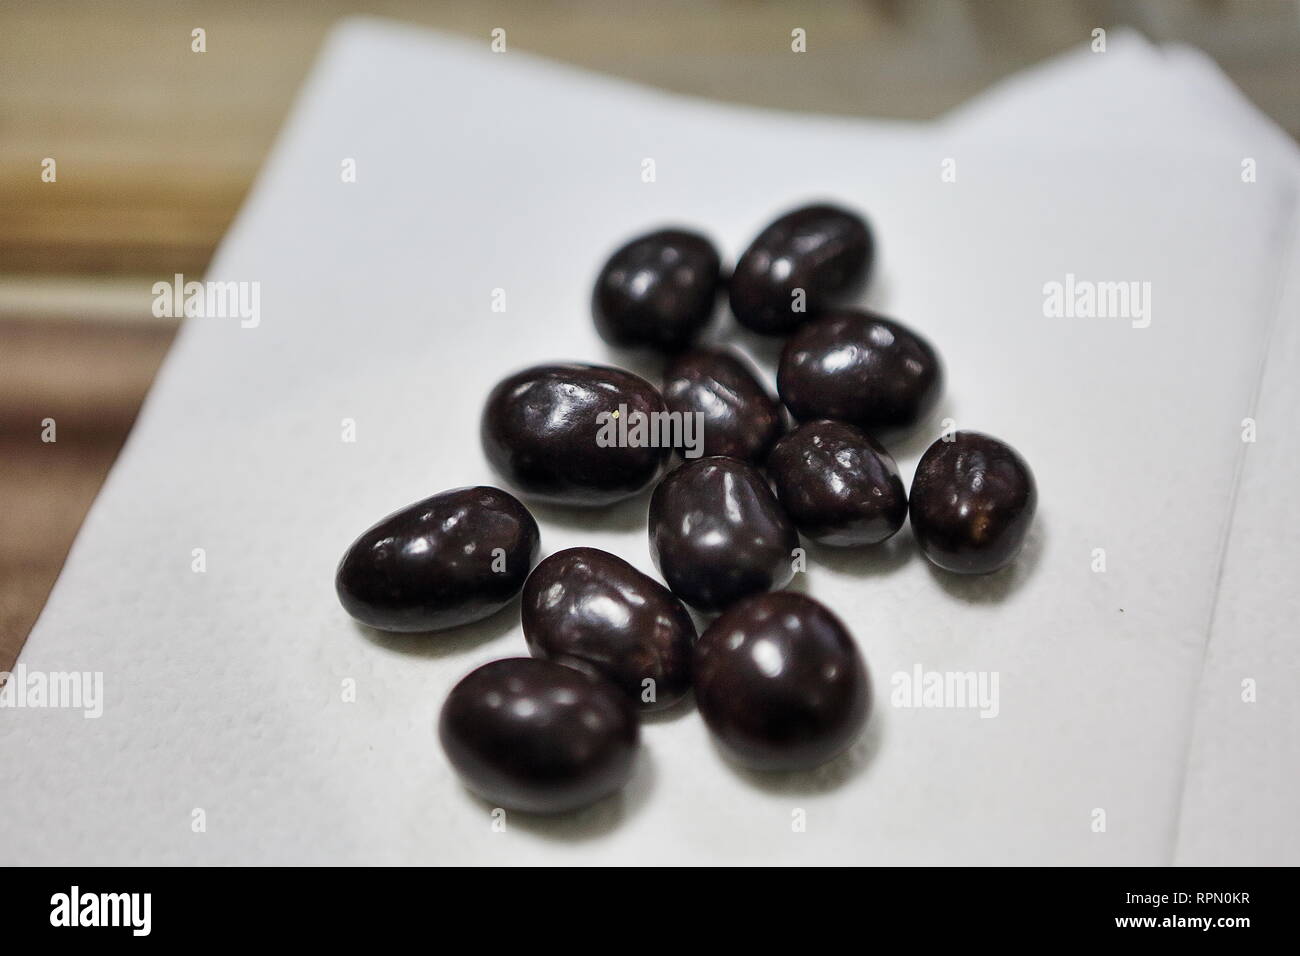 Peanuts in chocolate icing produced by Roshen factory owned by Ukraine's 5th President Petro Poroshenko, - a simple and much desired treat in Ukraine. Stock Photo